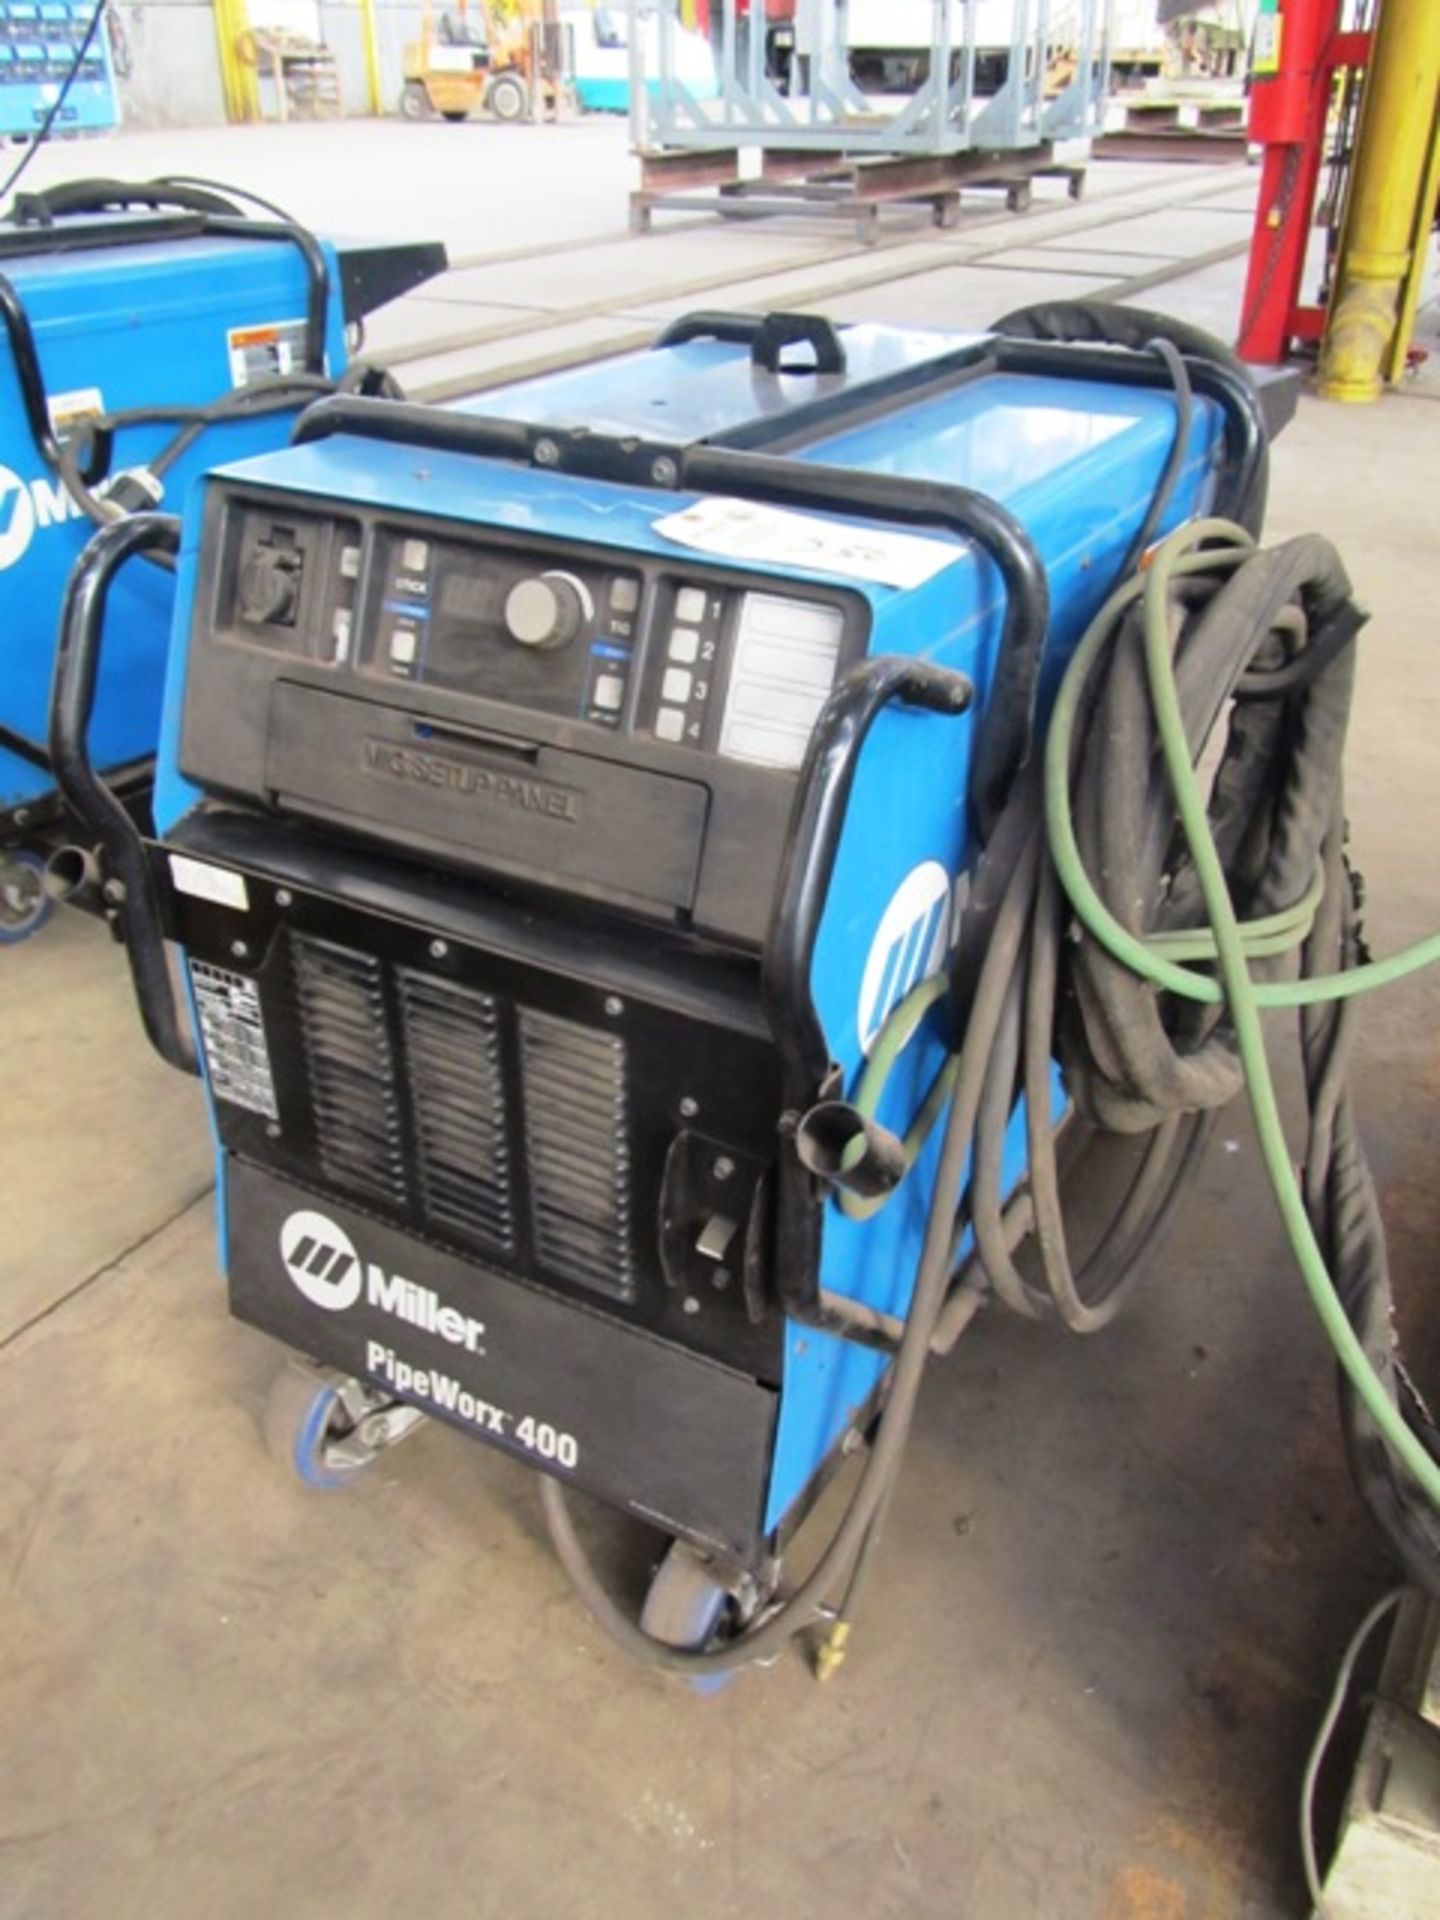 Miller PipeWorx 400 Portable Mig Welder with Miller PipeWorx Dual Wire Feeder, sn:MD130019G